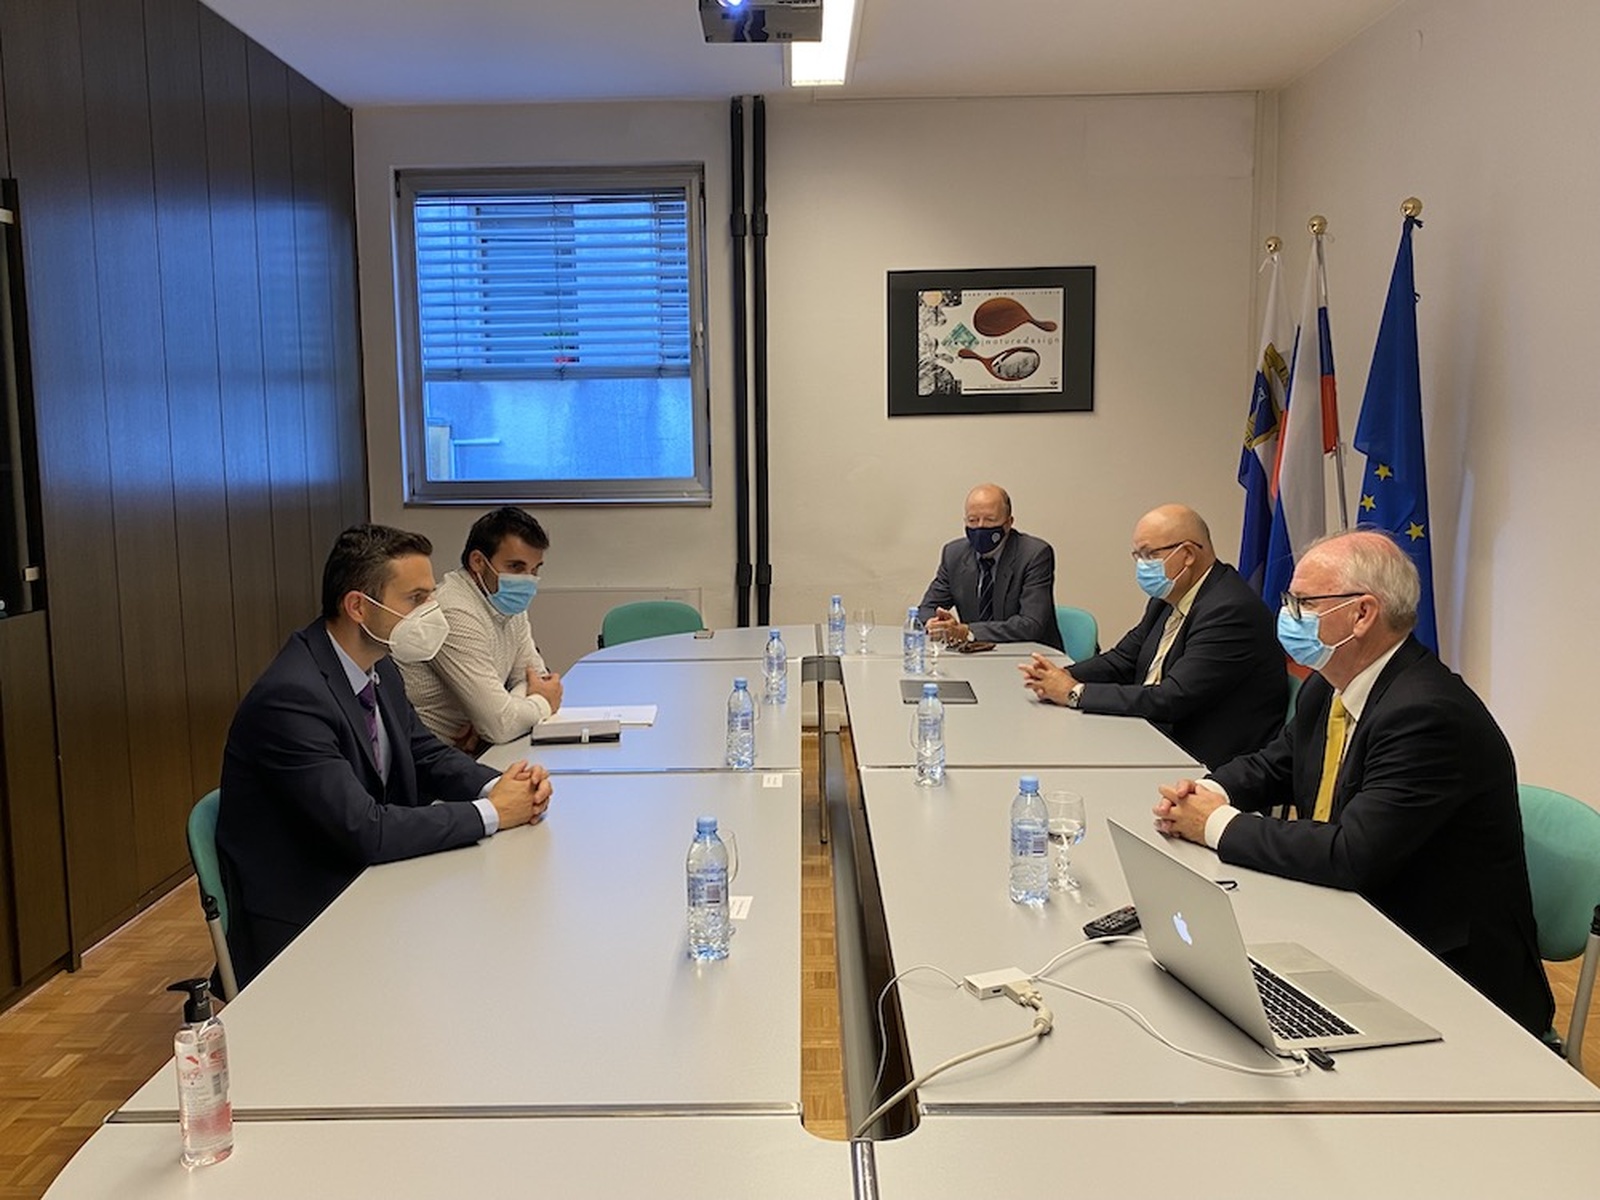 Visit of the Minister of Defence, Mag. Tonin, to the University of Nova Gorica